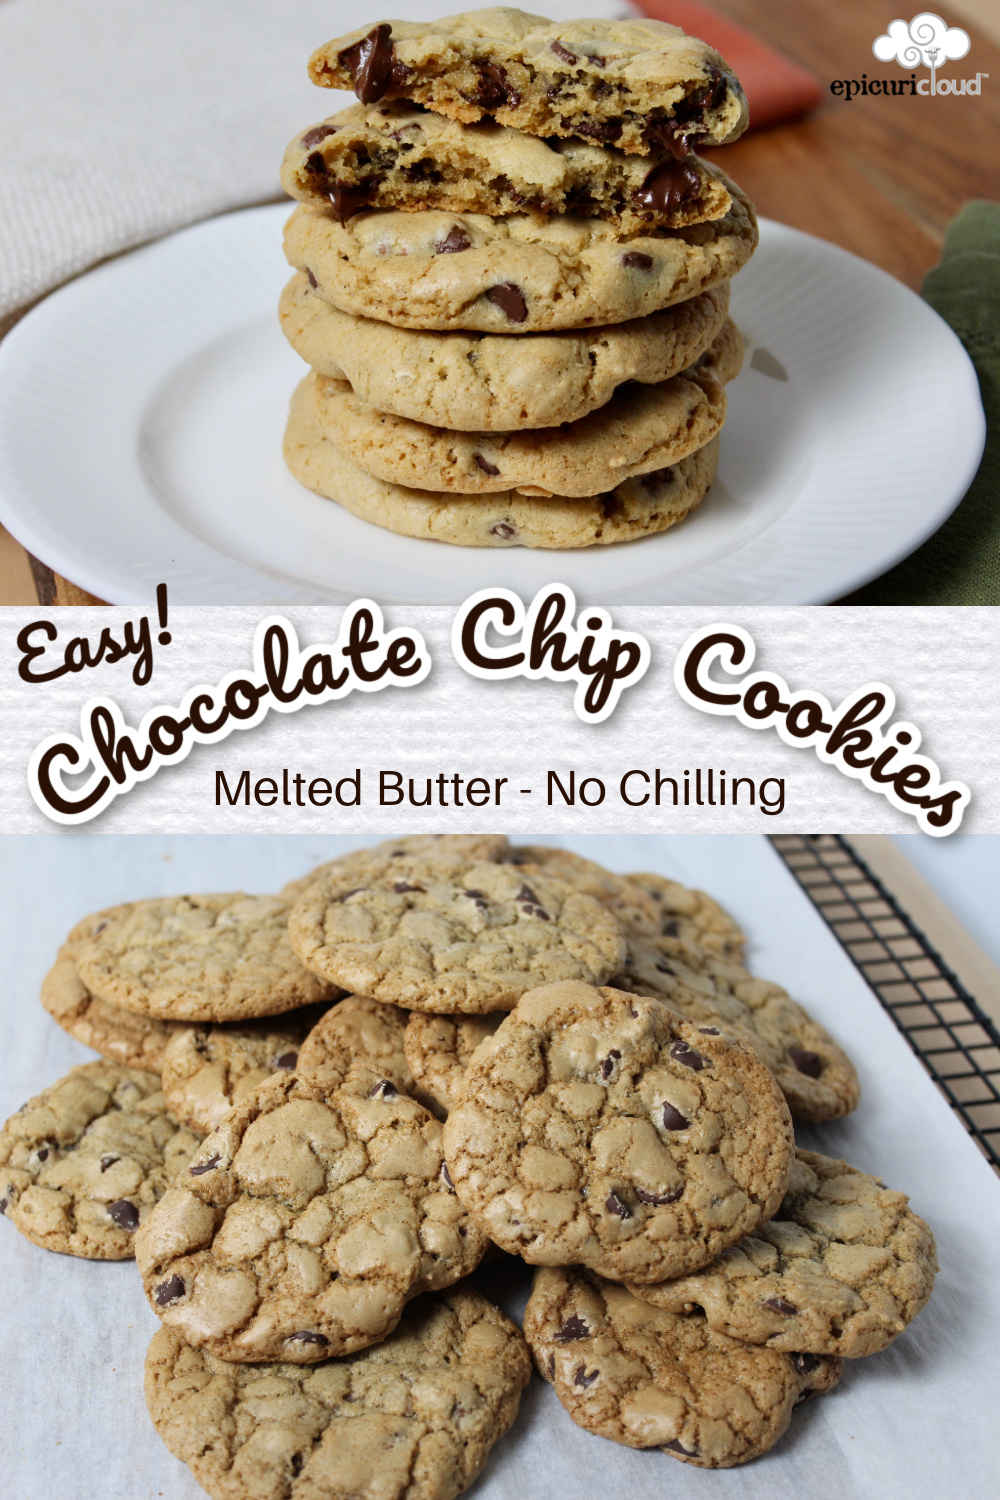 https://www.epicuricloud.com/wp-content/uploads/2020/12/melted-butter-choc.-chip-cookies-Pin.jpg